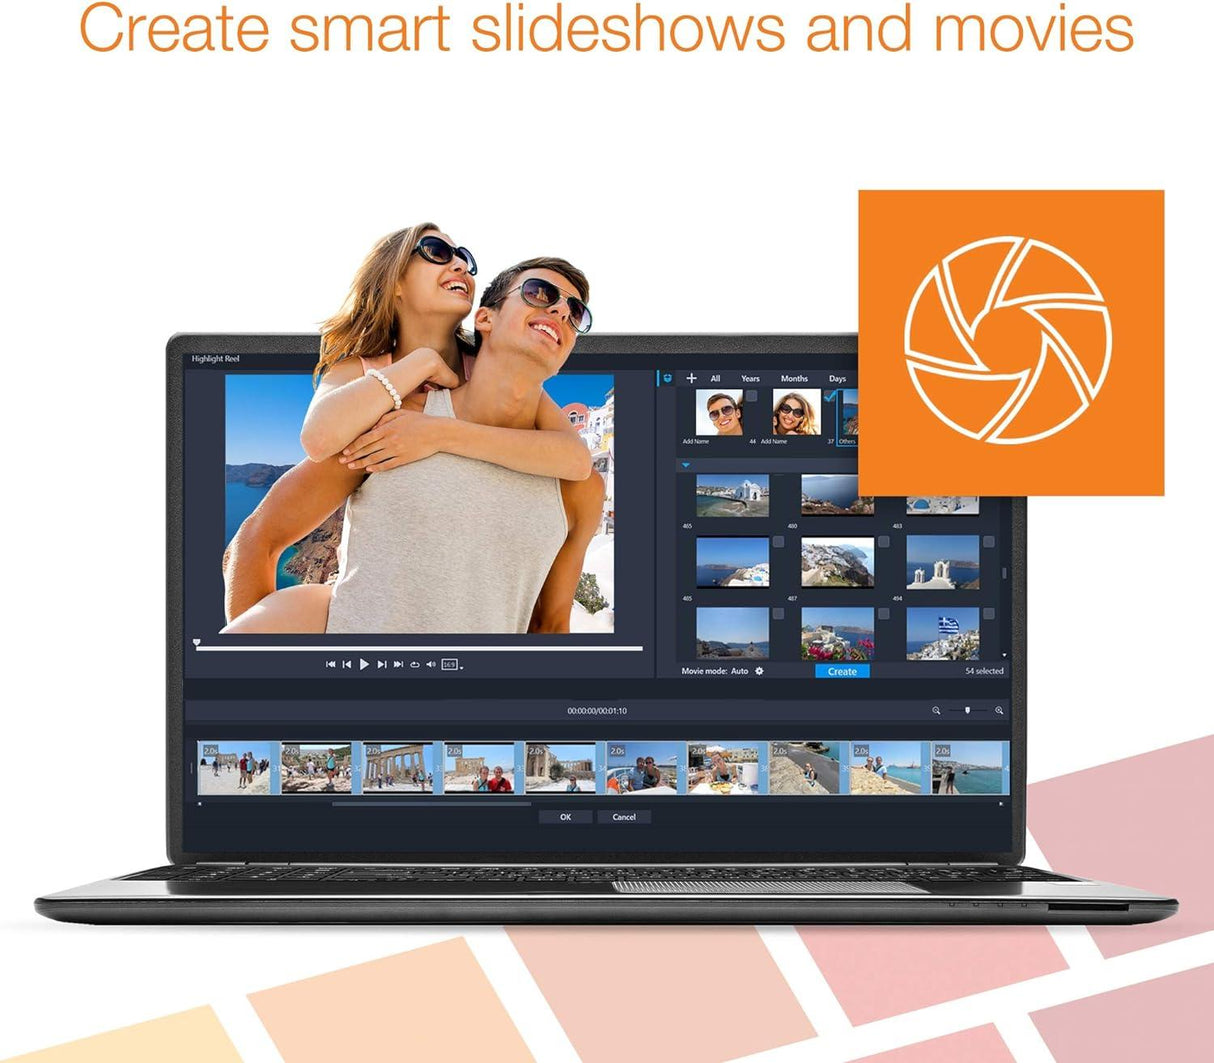 Roxio Creator NXT 8 - Instant Download for Windows (1 Computer) - SoftwareCW - Authorized Reseller